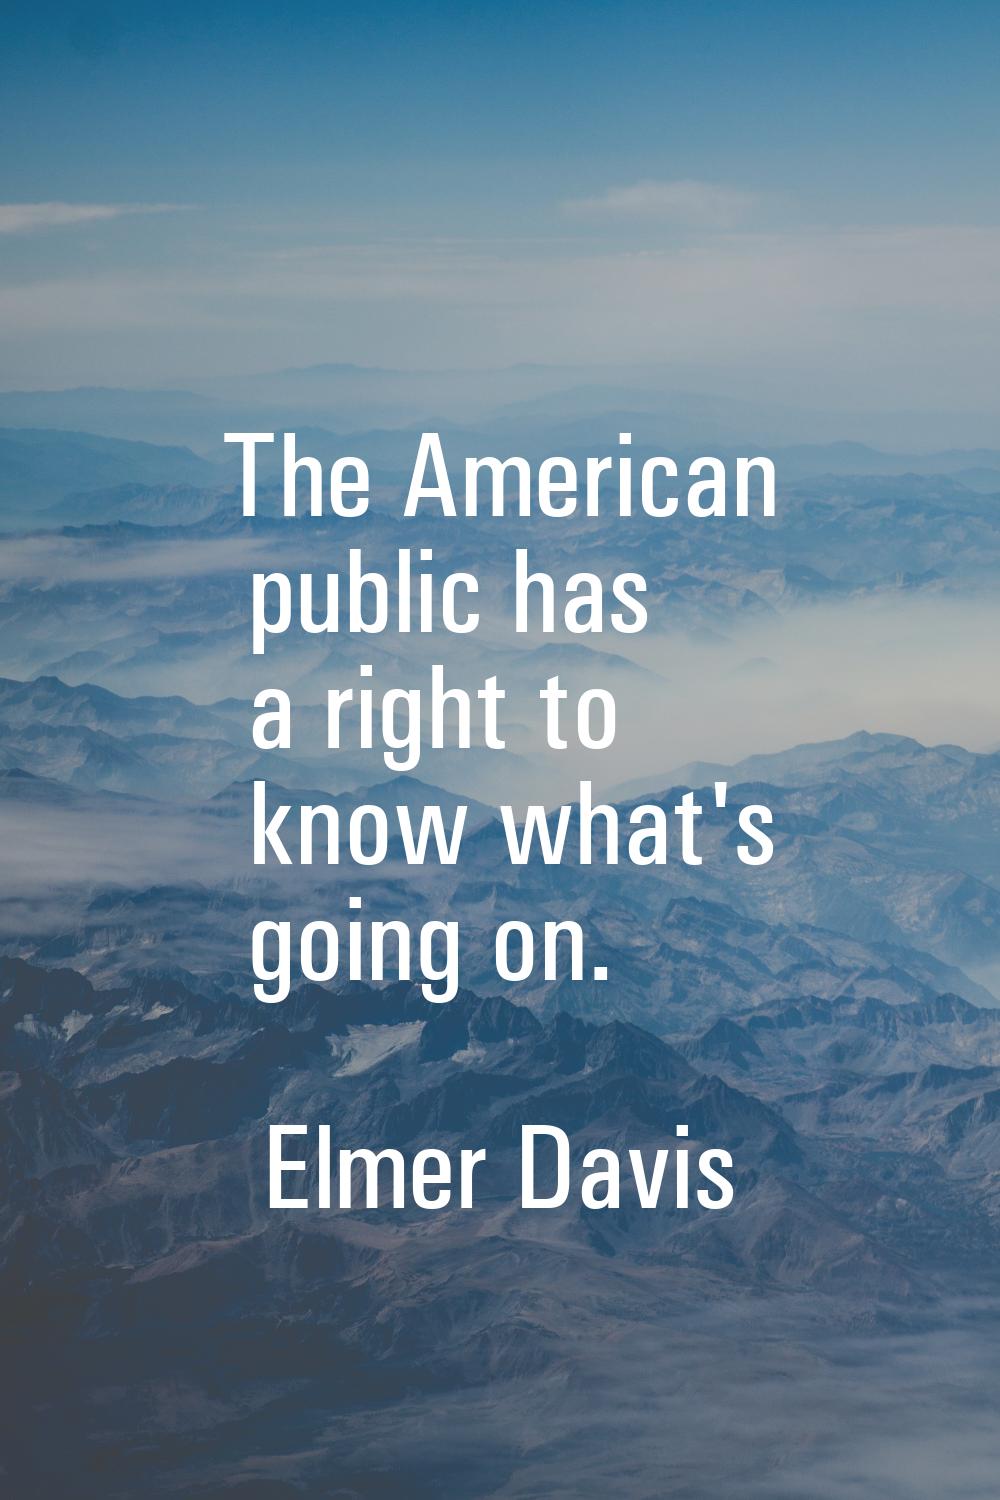 The American public has a right to know what's going on.